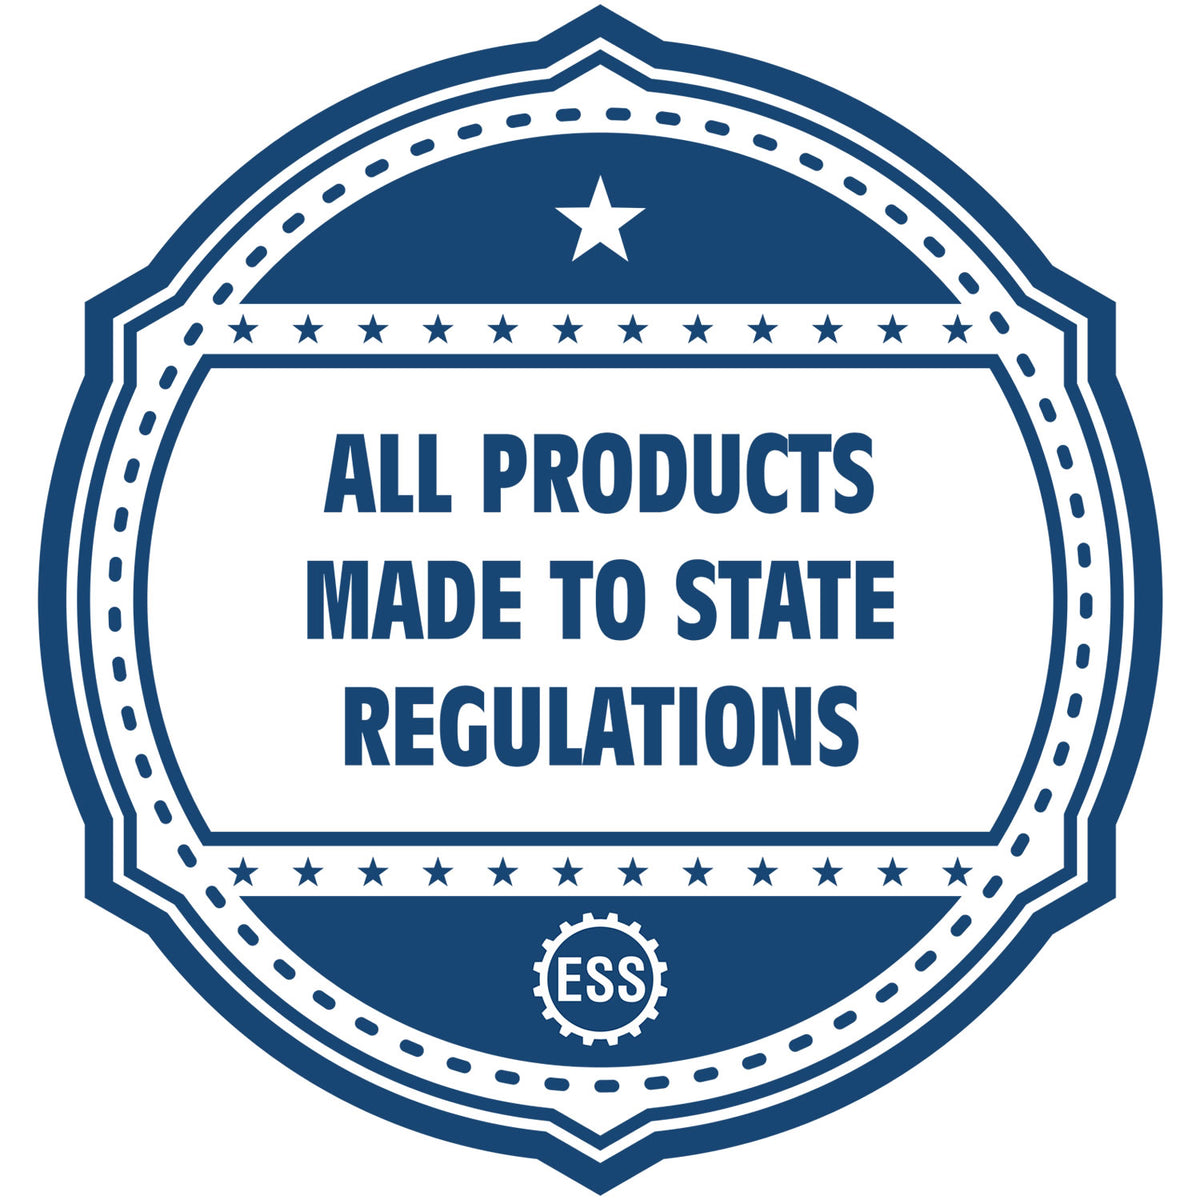 An icon or badge element for the State of District of Columbia Extended Long Reach Engineer Seal showing that this product is made in compliance with state regulations.